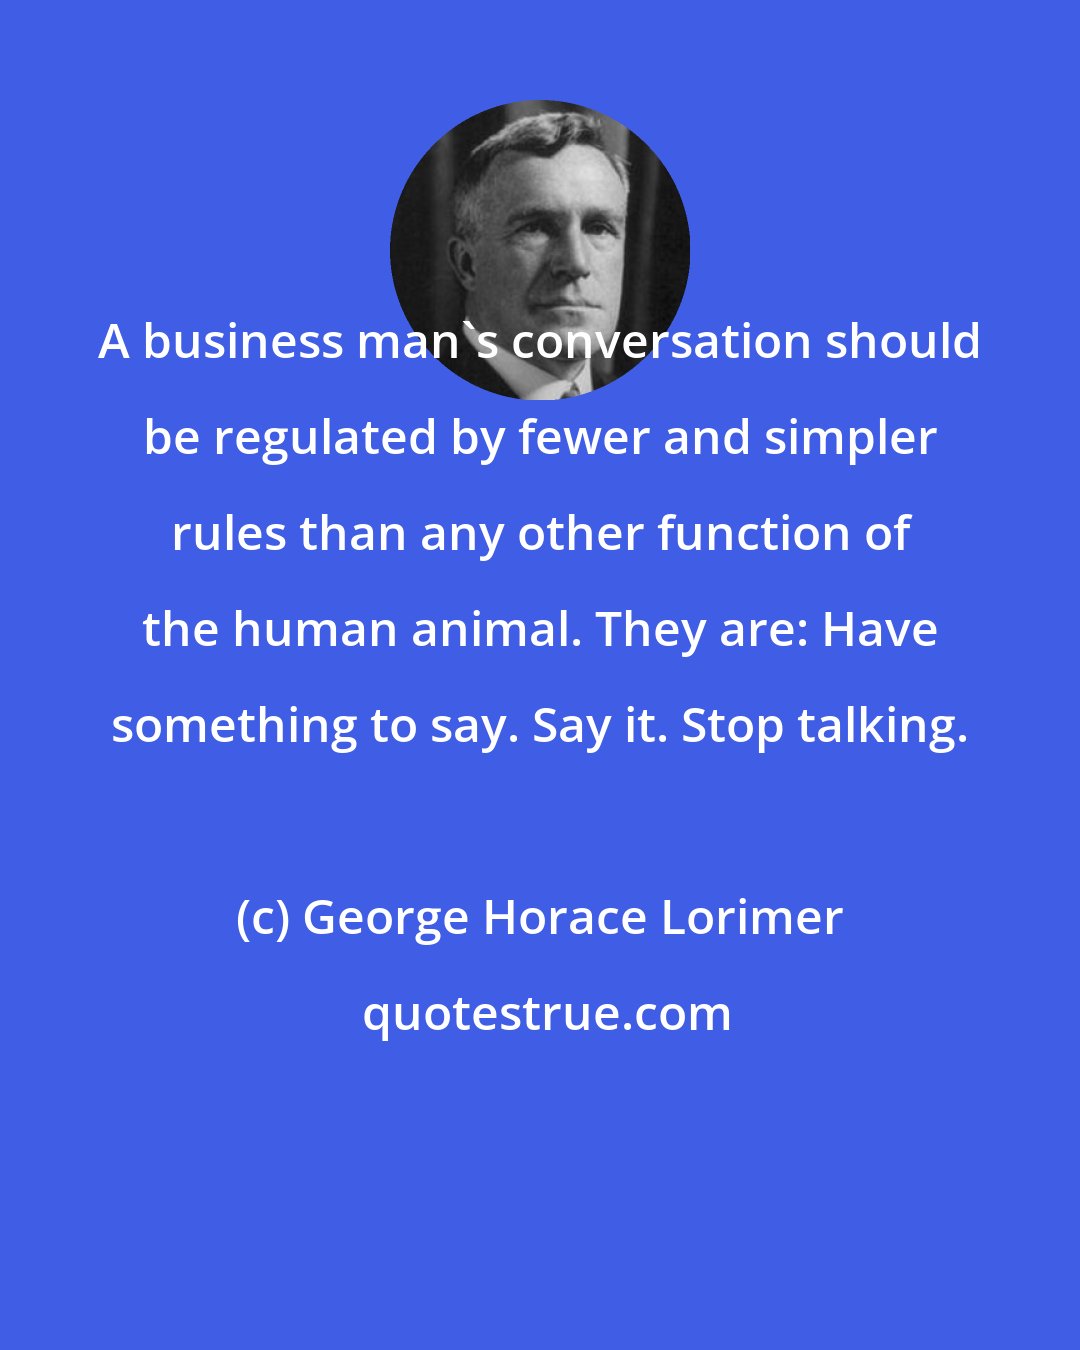 George Horace Lorimer: A business man's conversation should be regulated by fewer and simpler rules than any other function of the human animal. They are: Have something to say. Say it. Stop talking.